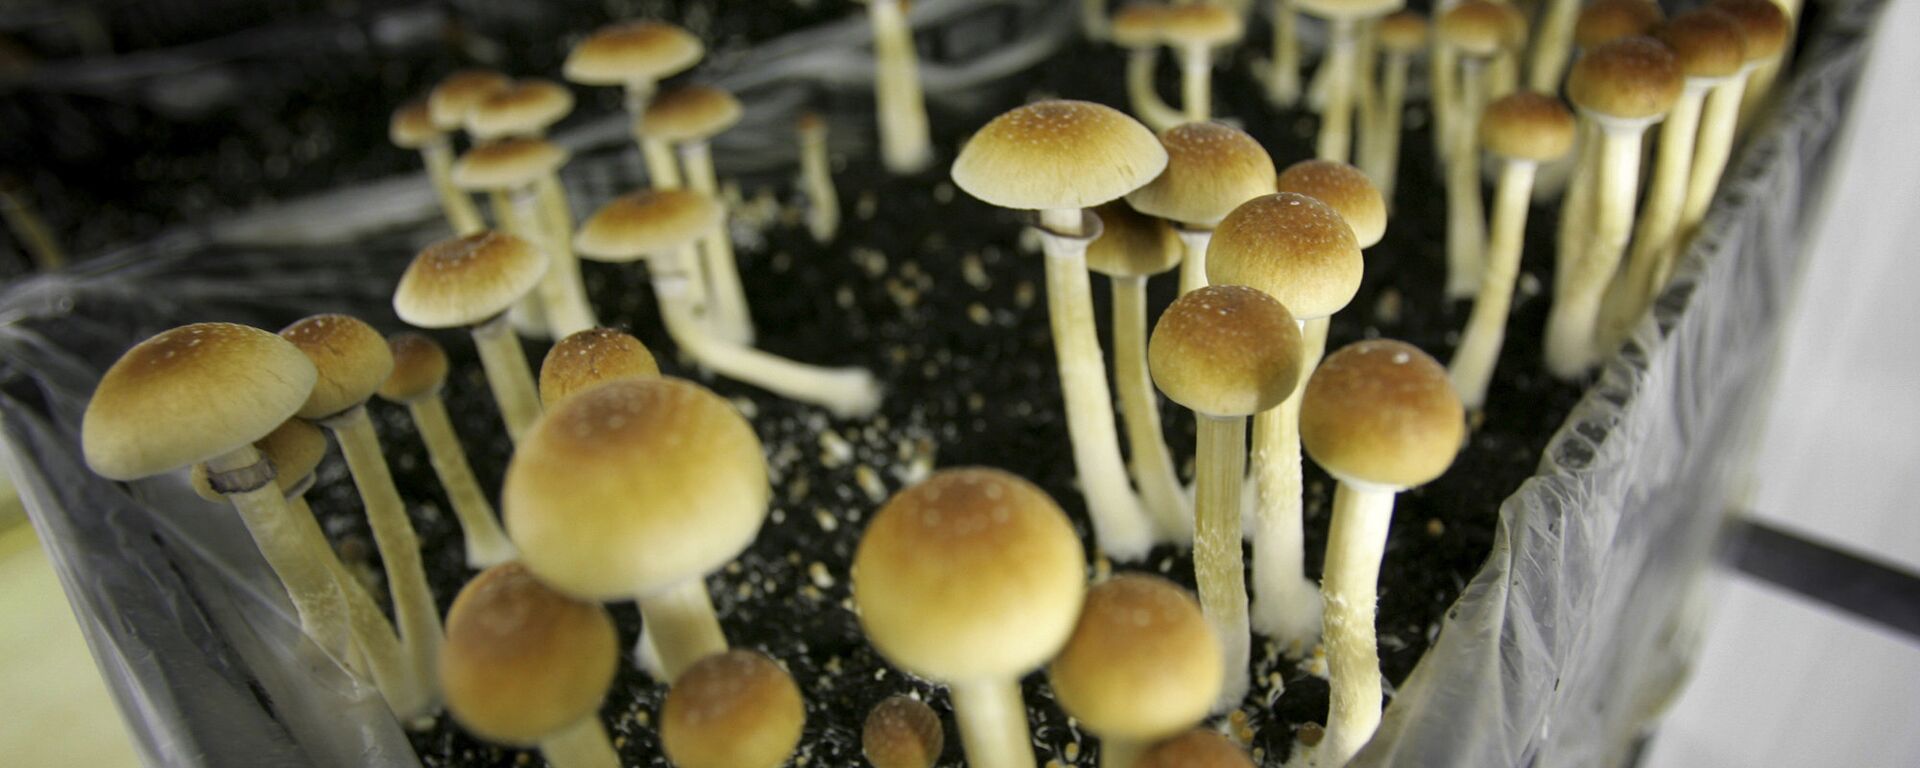 Mushrooms containing the active ingredient psilocybin are seen in a grow room - Sputnik International, 1920, 19.04.2022